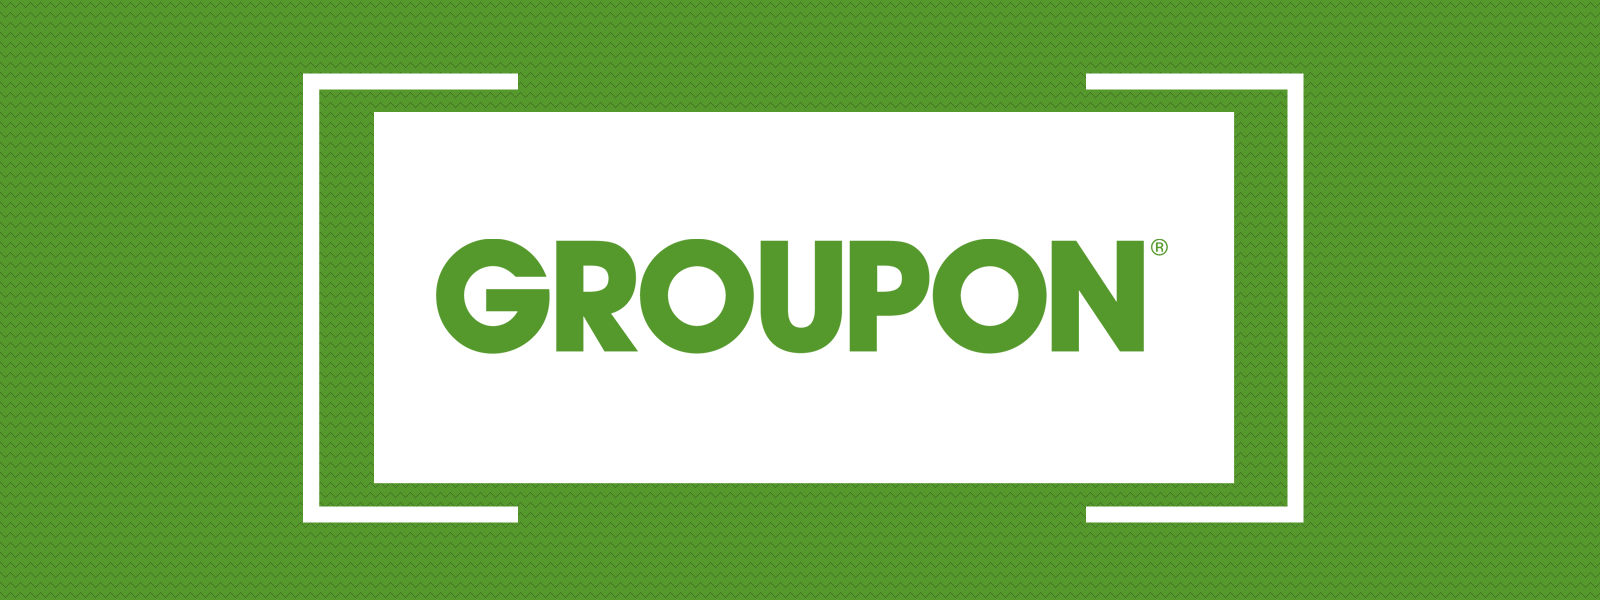 Groupon: Discover the Best Coupon Site - Myce.com